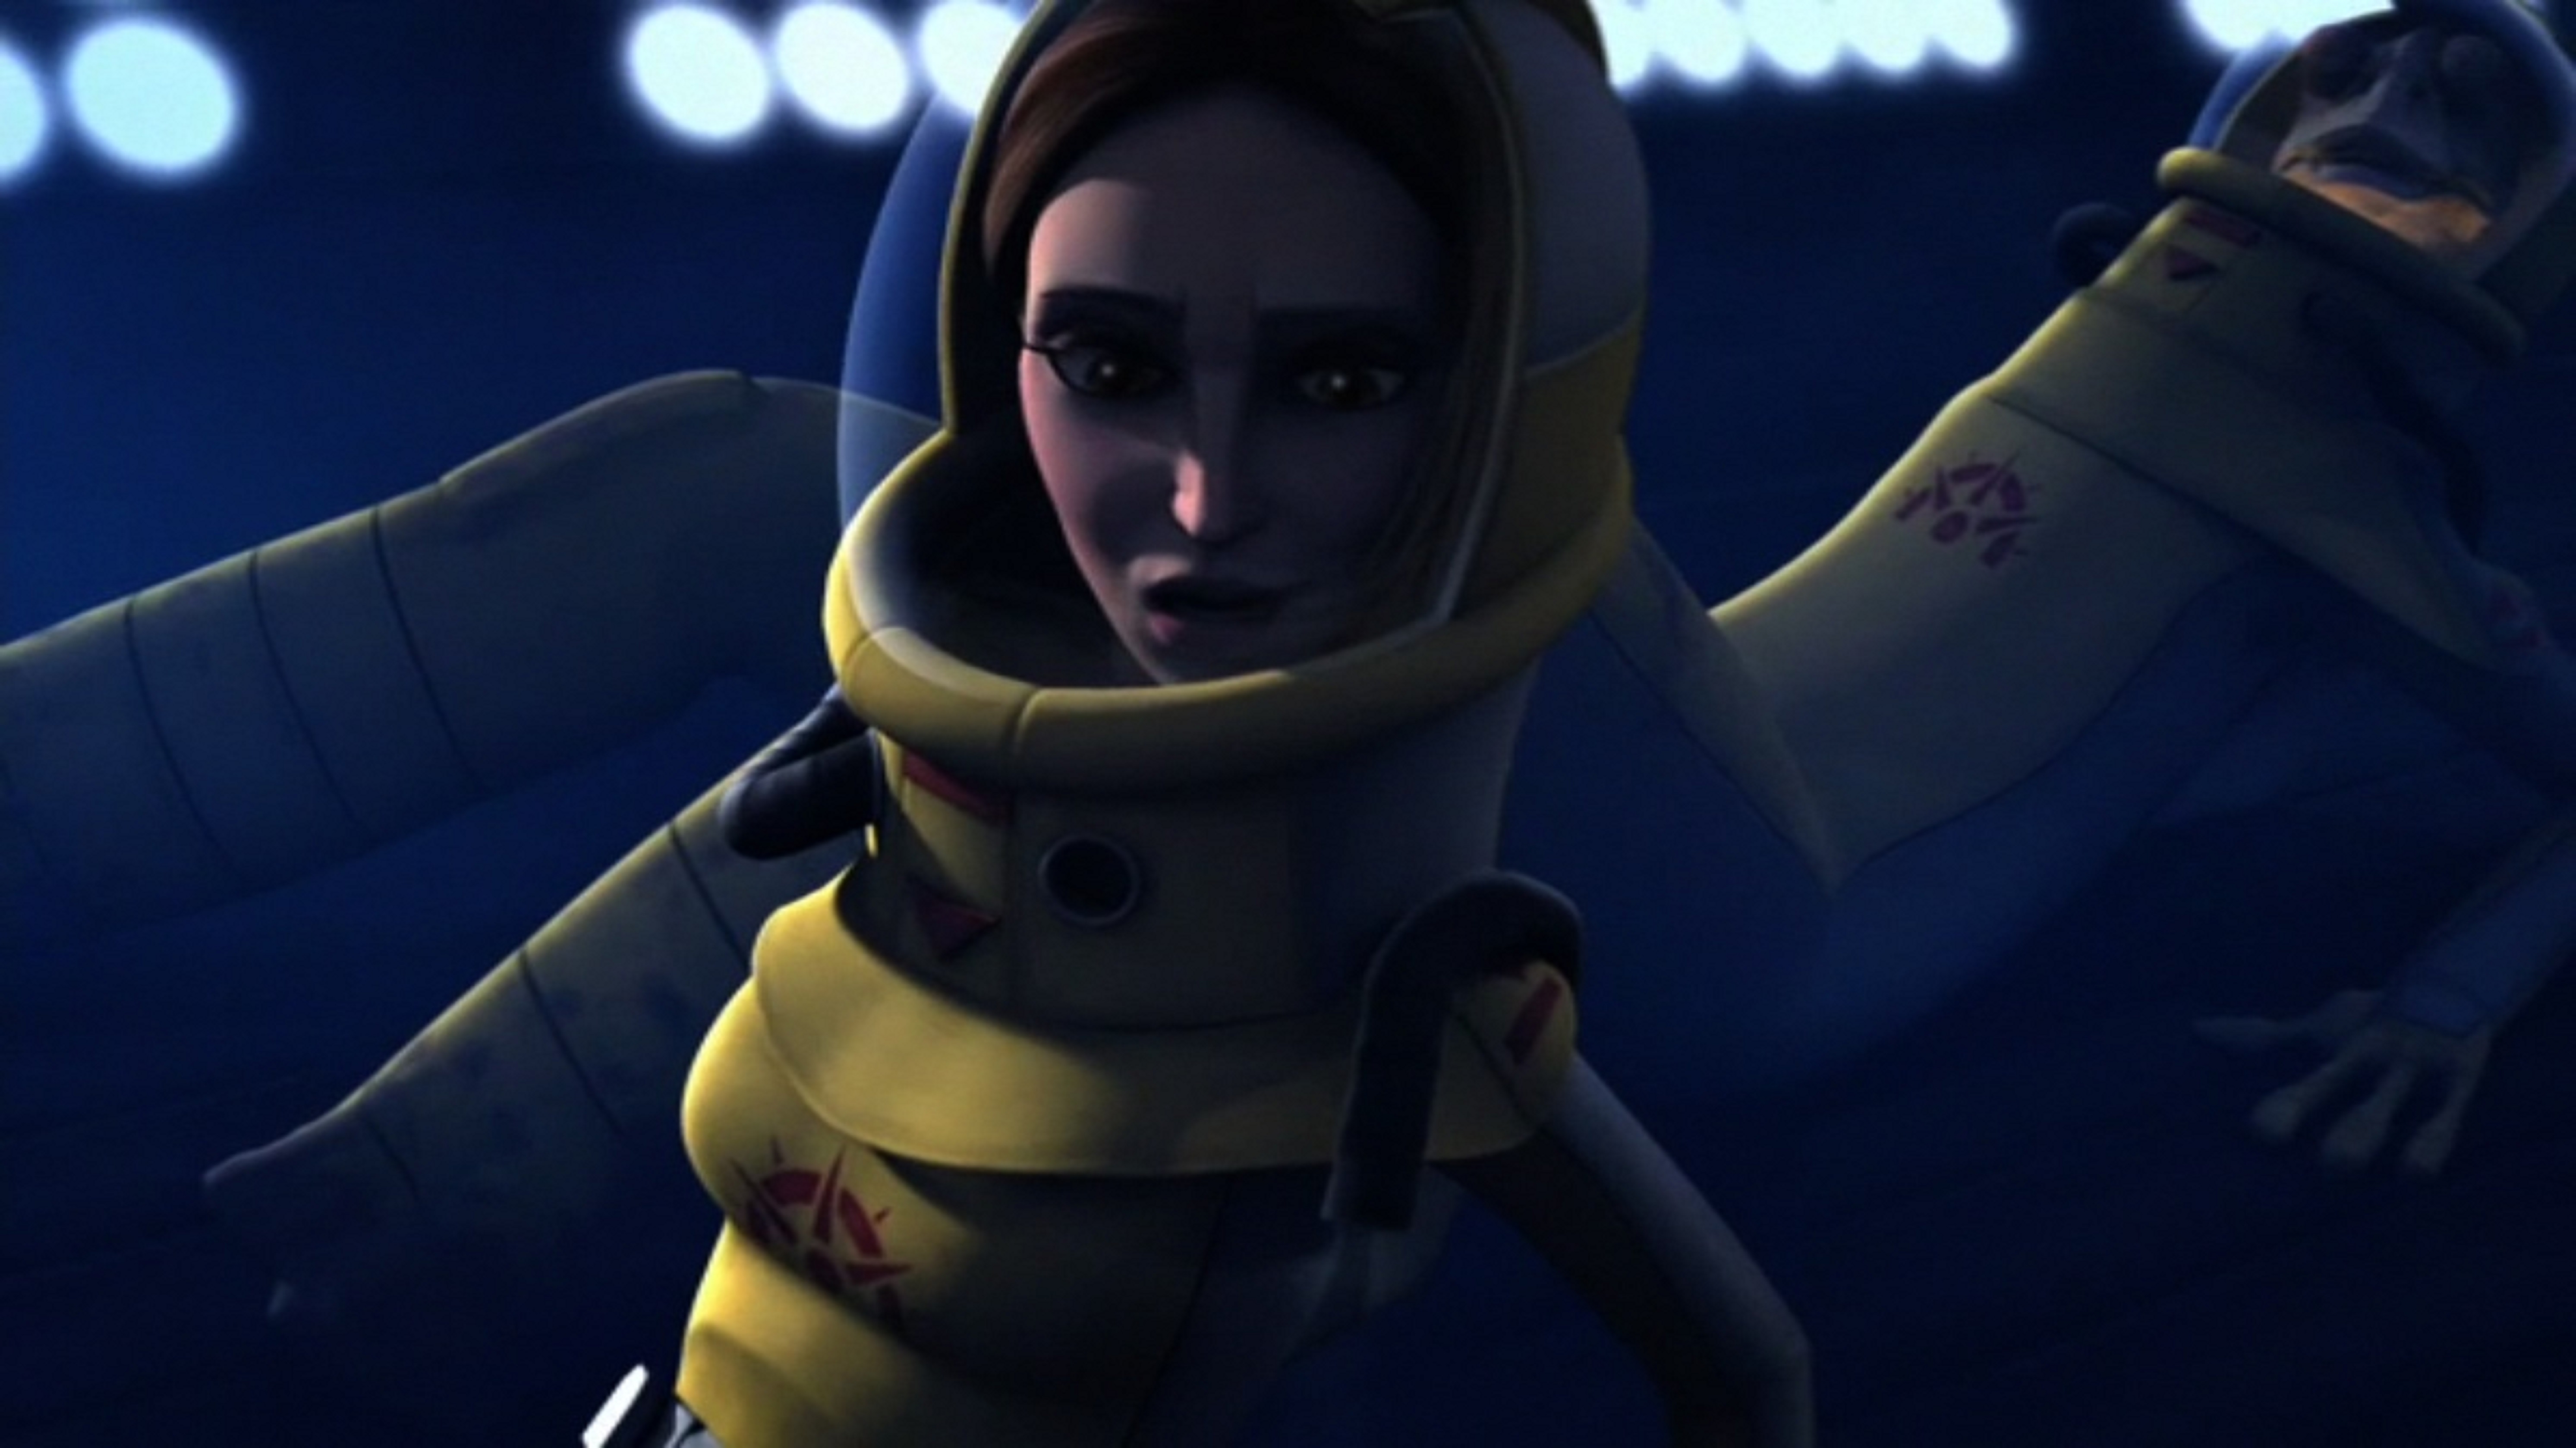 The Blue Shadow Virus Is Unleashed, Padme Gets Infected - Comic Vine